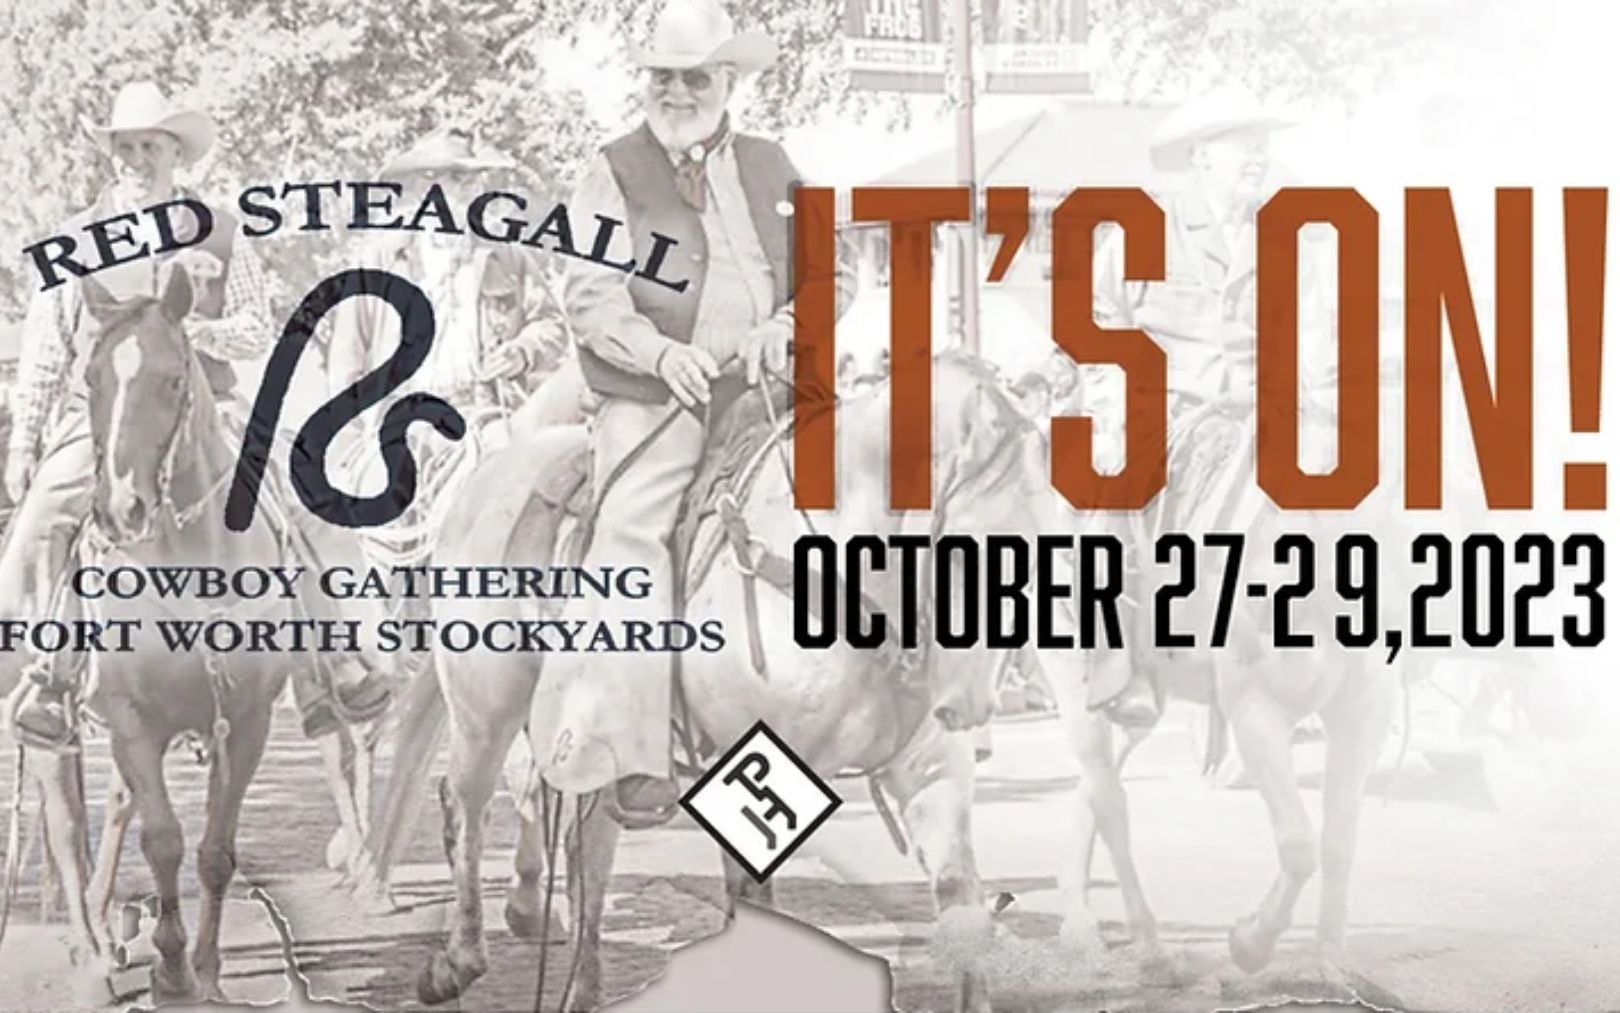 Red Steagall Cowboy Gathering Cowtown Coliseum